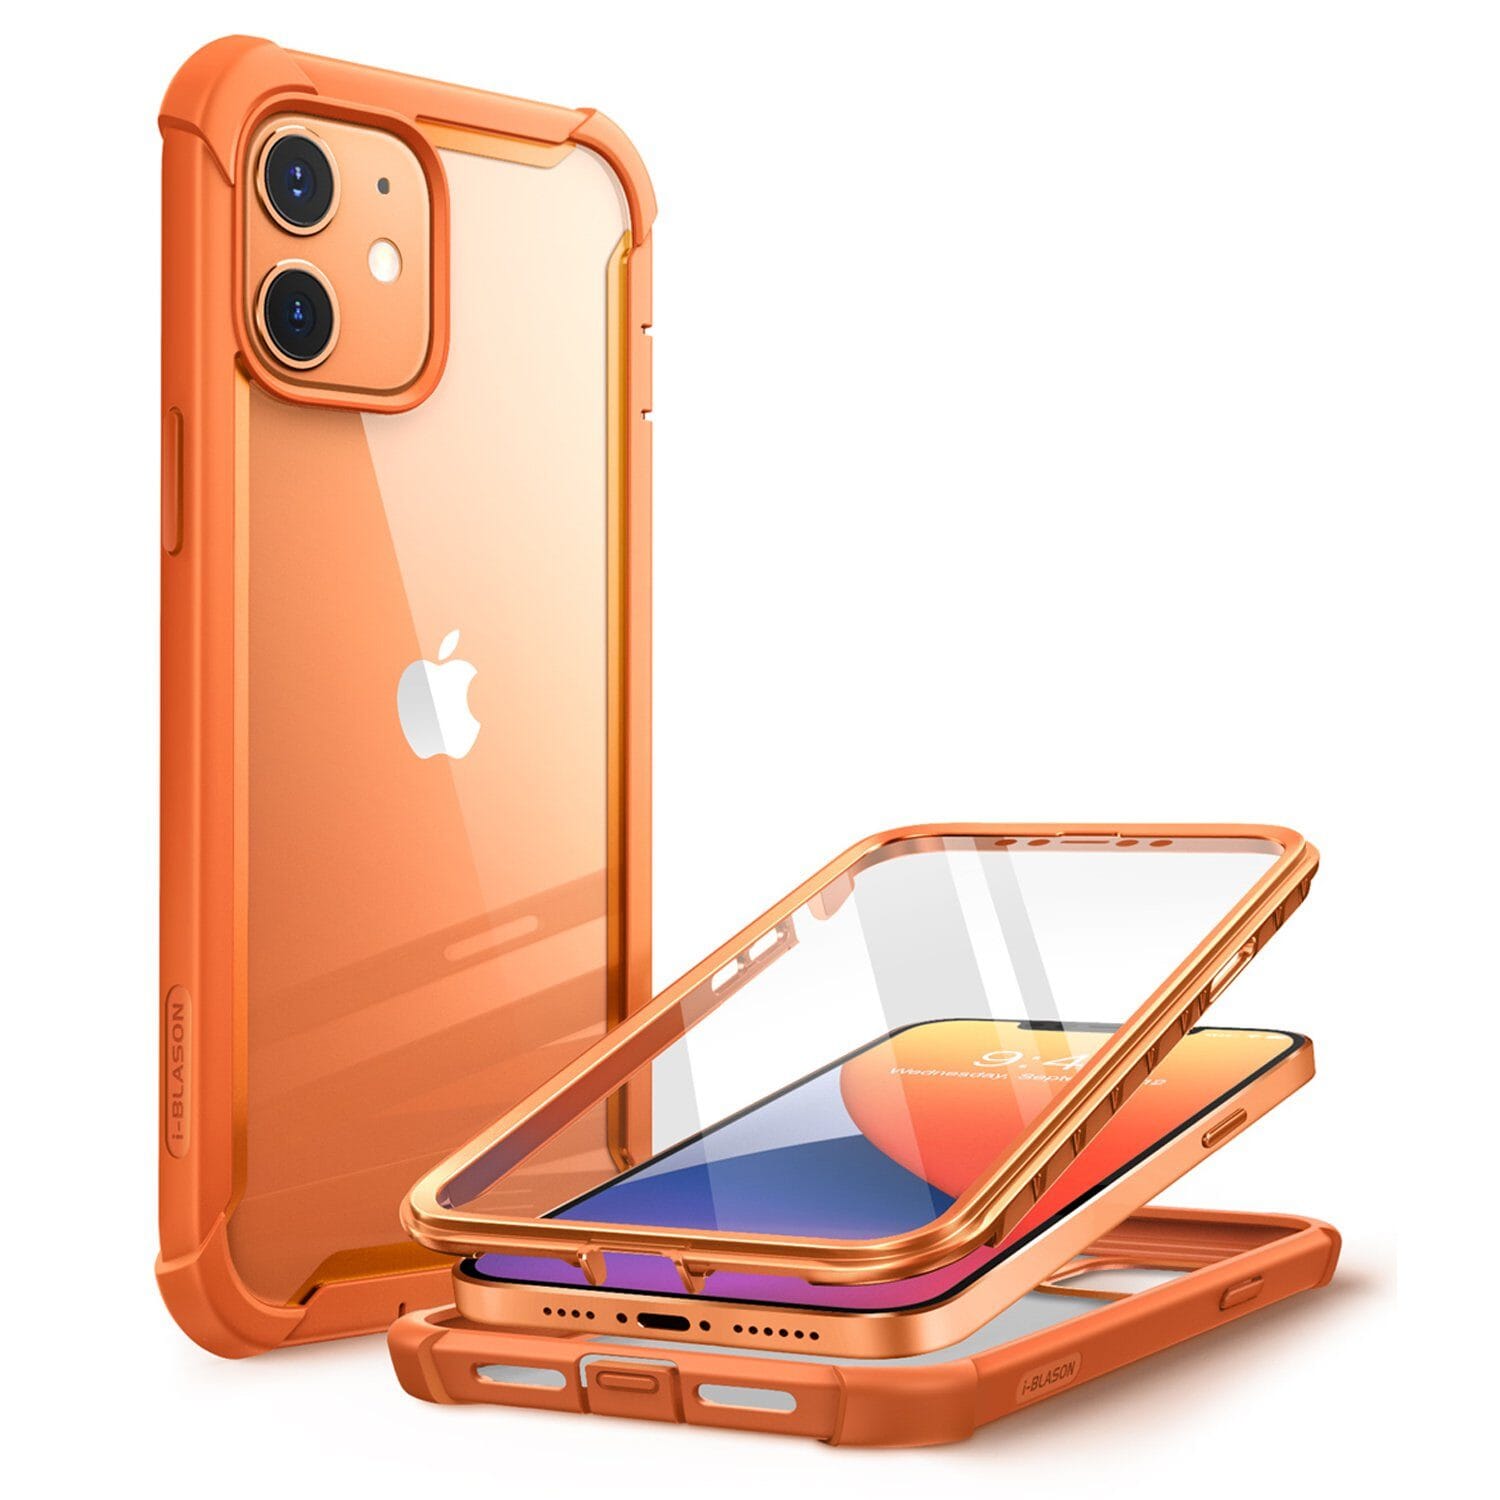 i-Blason Ares Series Rugged Clear Bumper Case for iPhone 12 Series (With Build-in Screen Protector) iPhone 12 Series i-Blason Orange iPhone 12/12 Pro 6.1" 